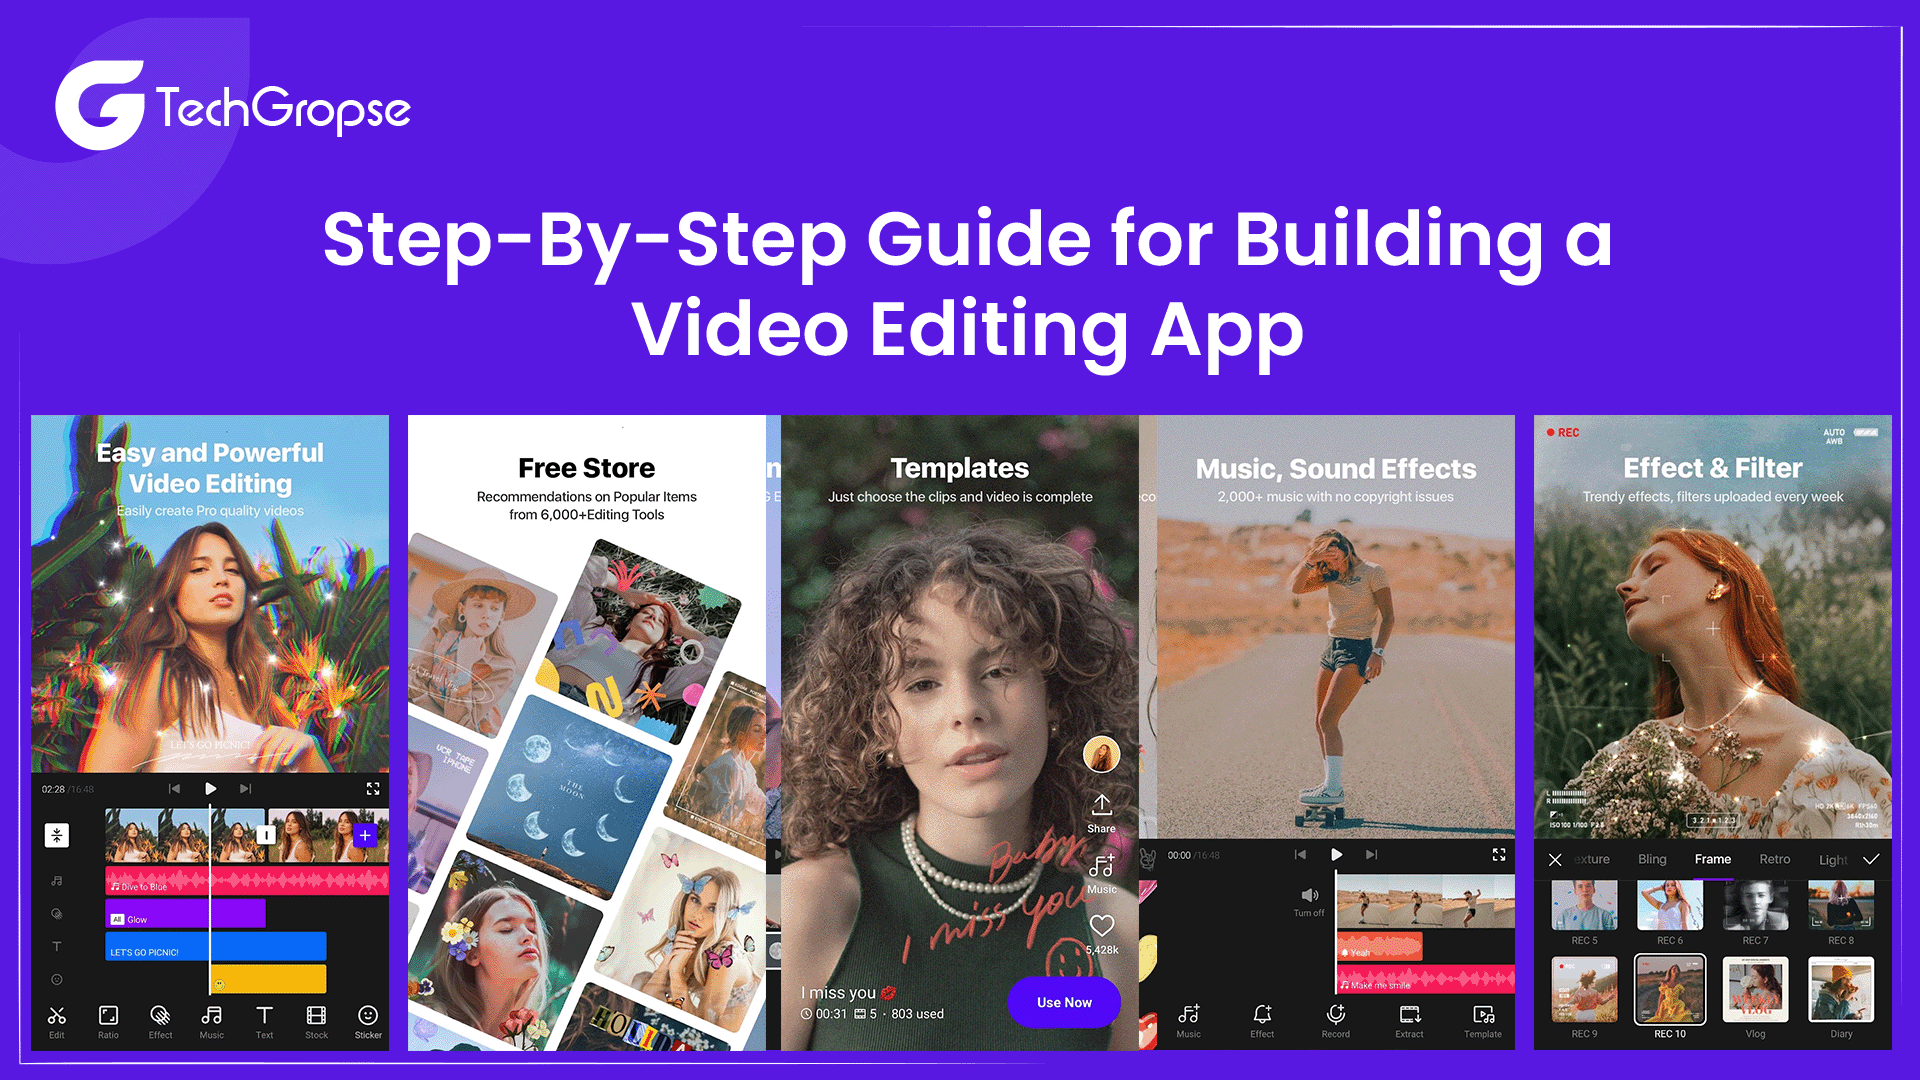 Step-By-Step Guide for Building a Video Editing App